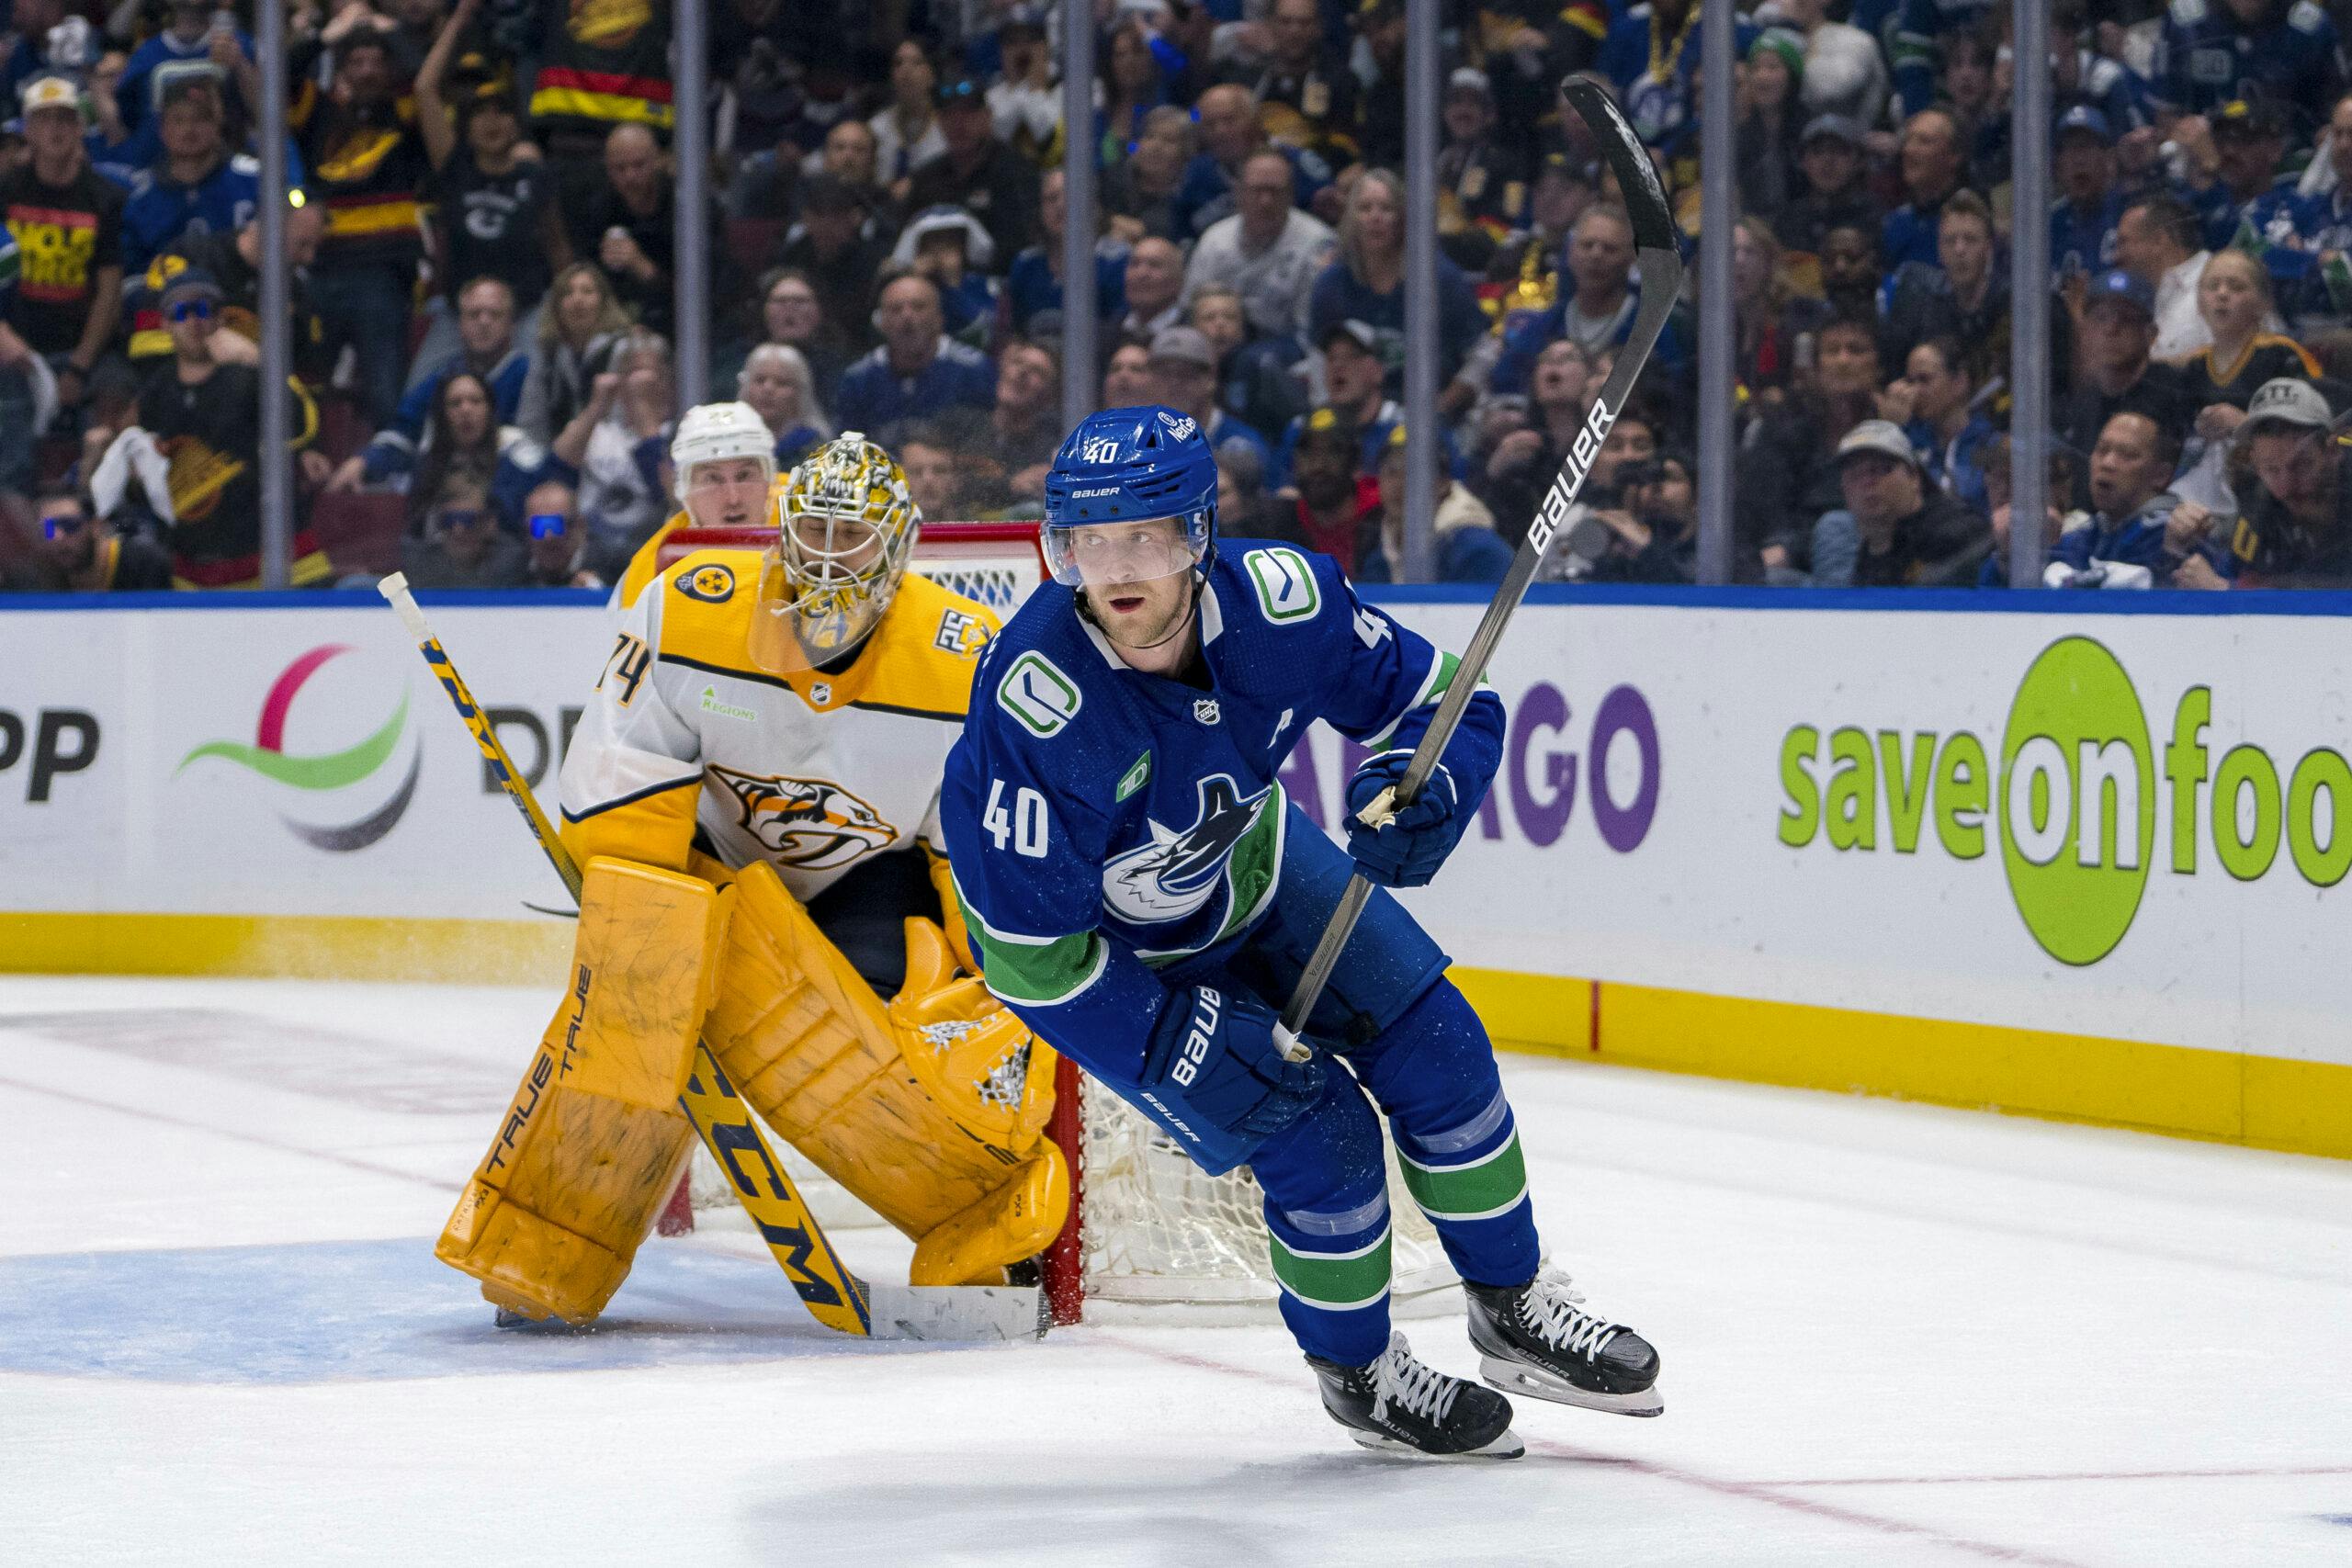 NHL Betting Preview for Game 6 of this Vancouver Canucks, Nashville Predators series.